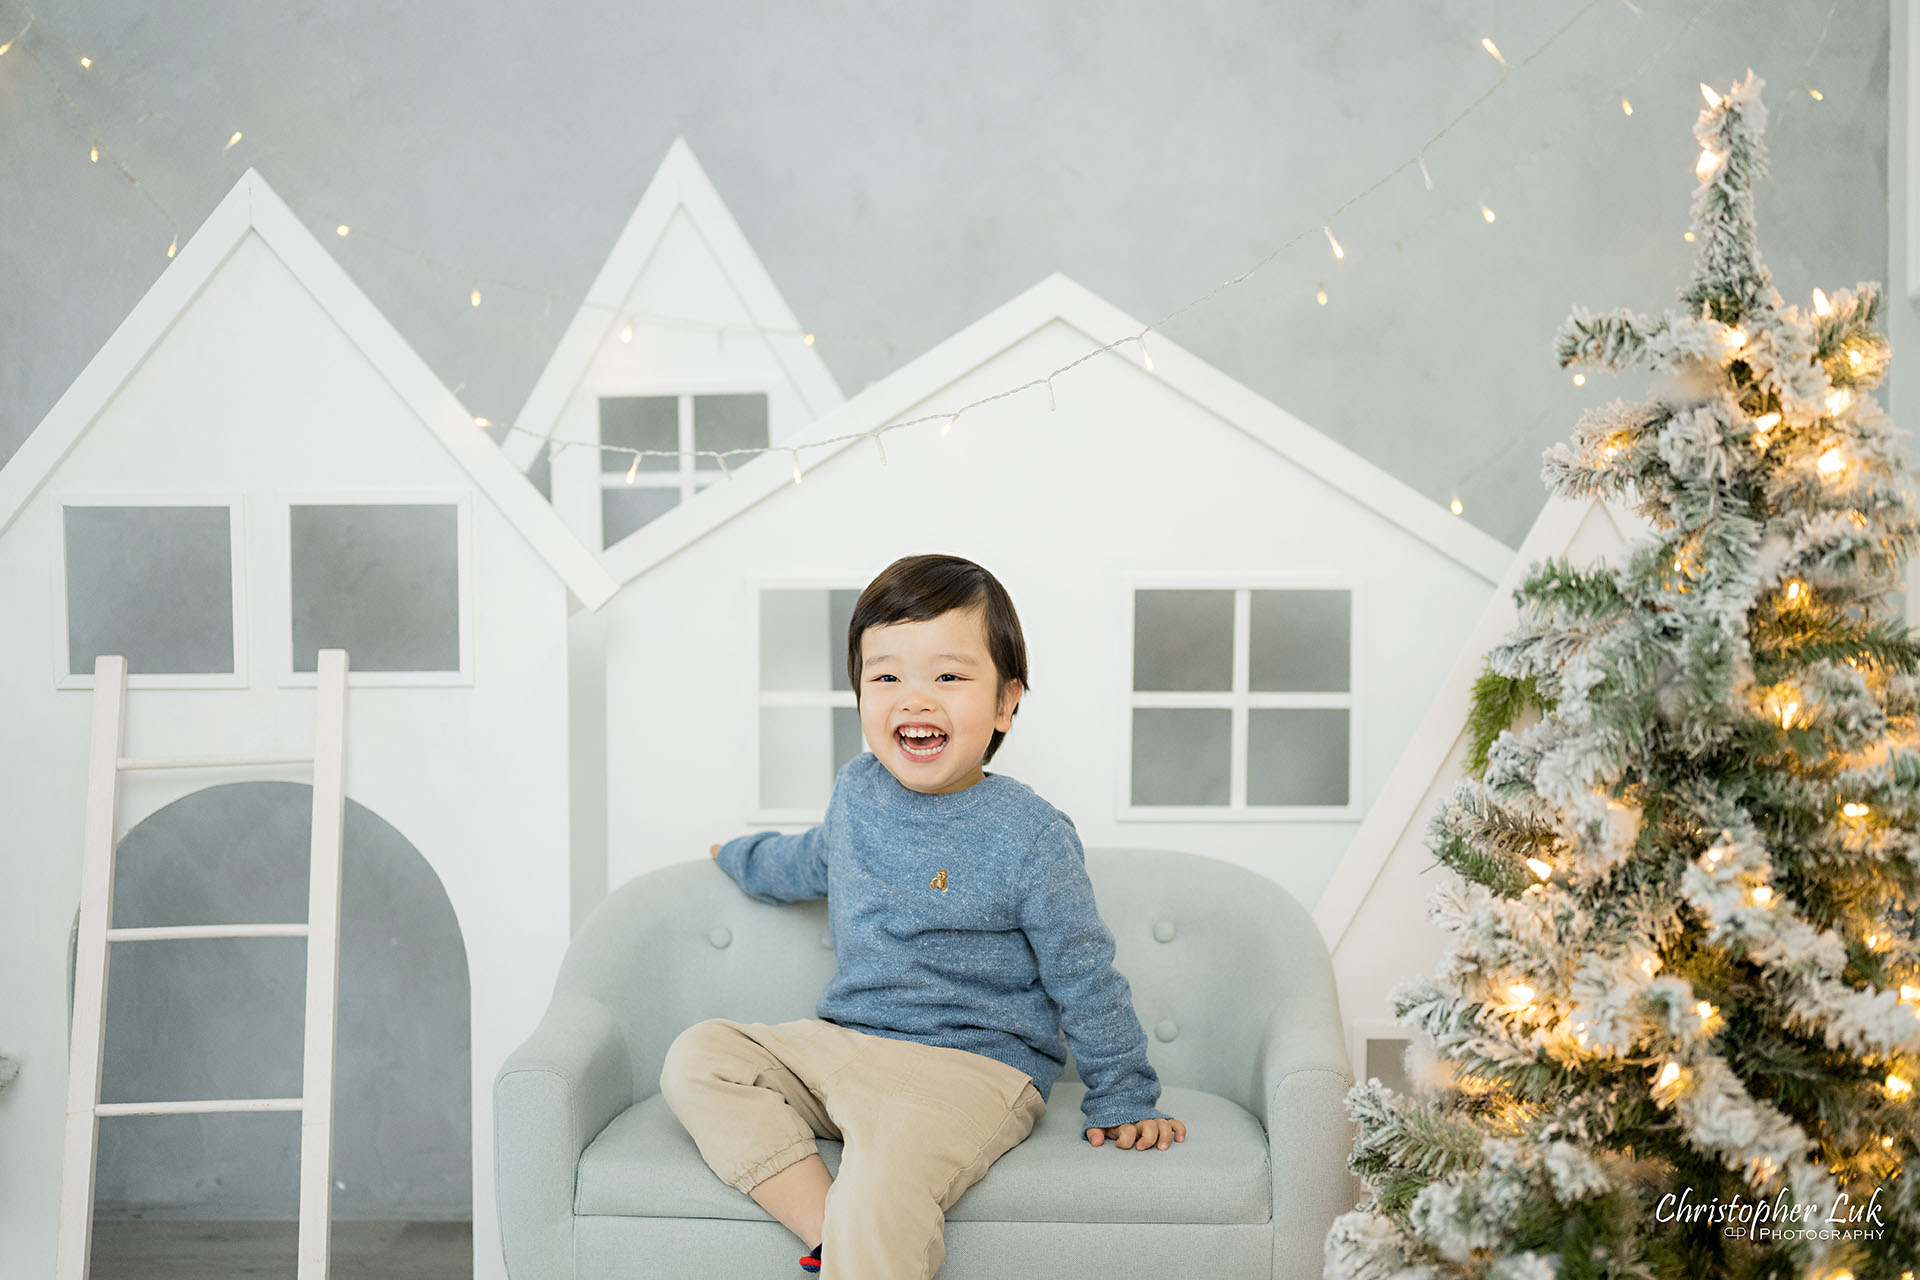 Christmas Family Photos Toronto Markham Holiday Festive Studio Pictures Photographer Natural Candid Photojournalistic Organic Son Child Laugh Fun Cute Adorable Smile